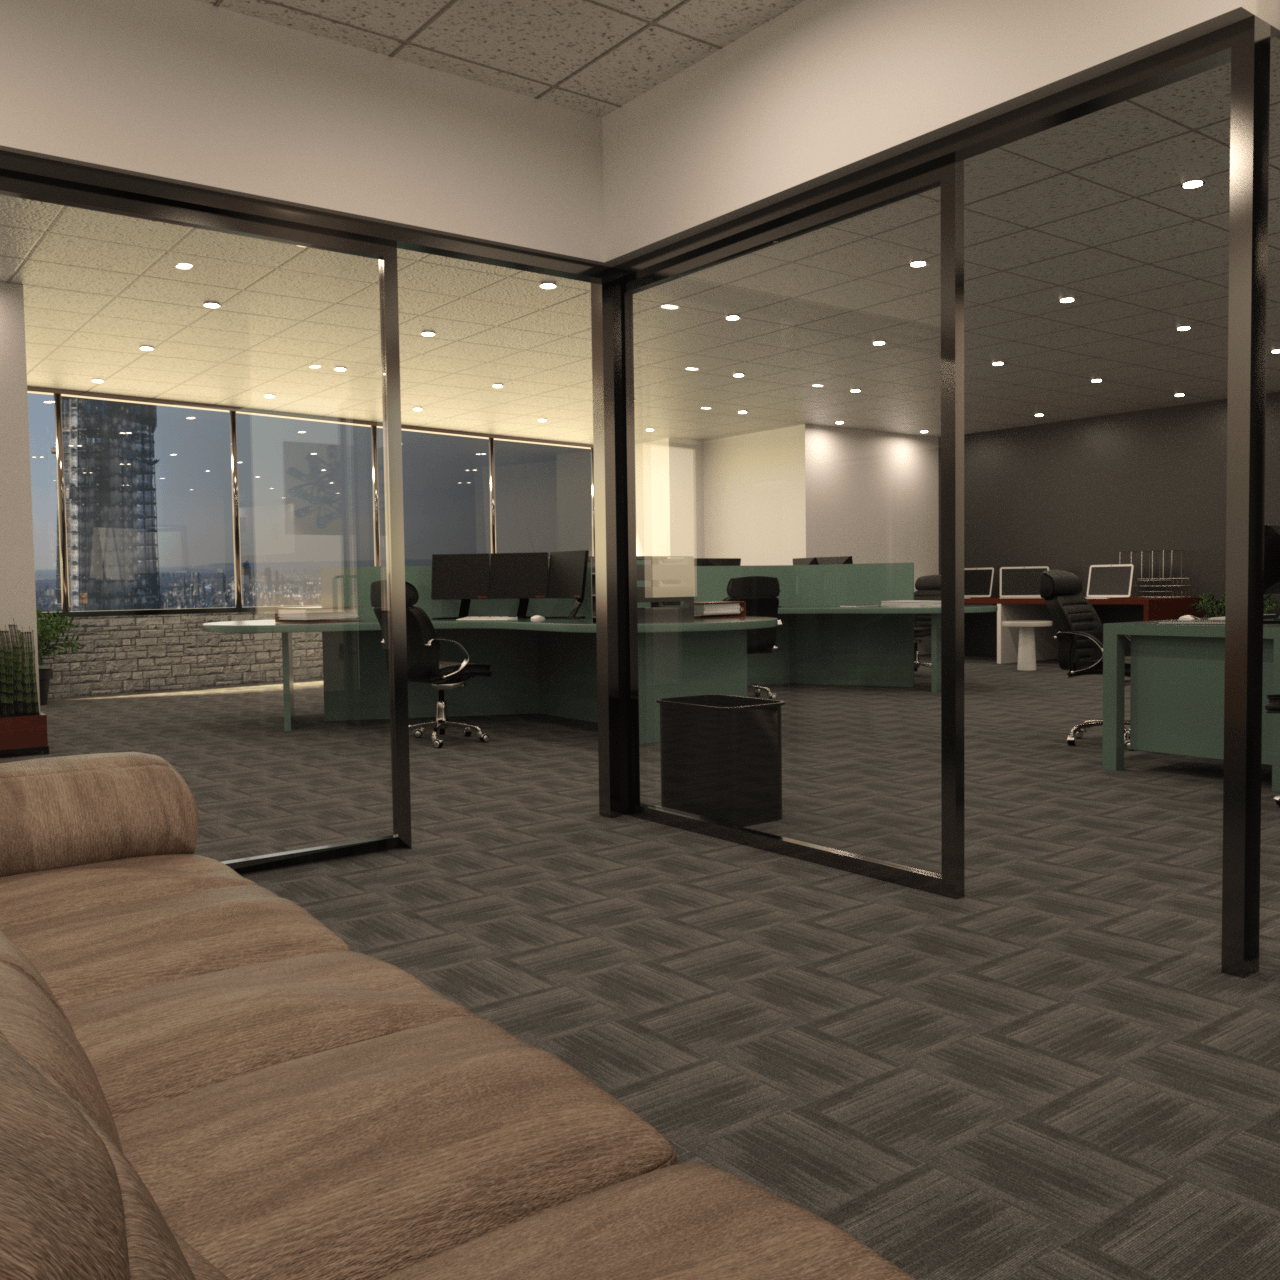 Waiting area inside the office 3d model.